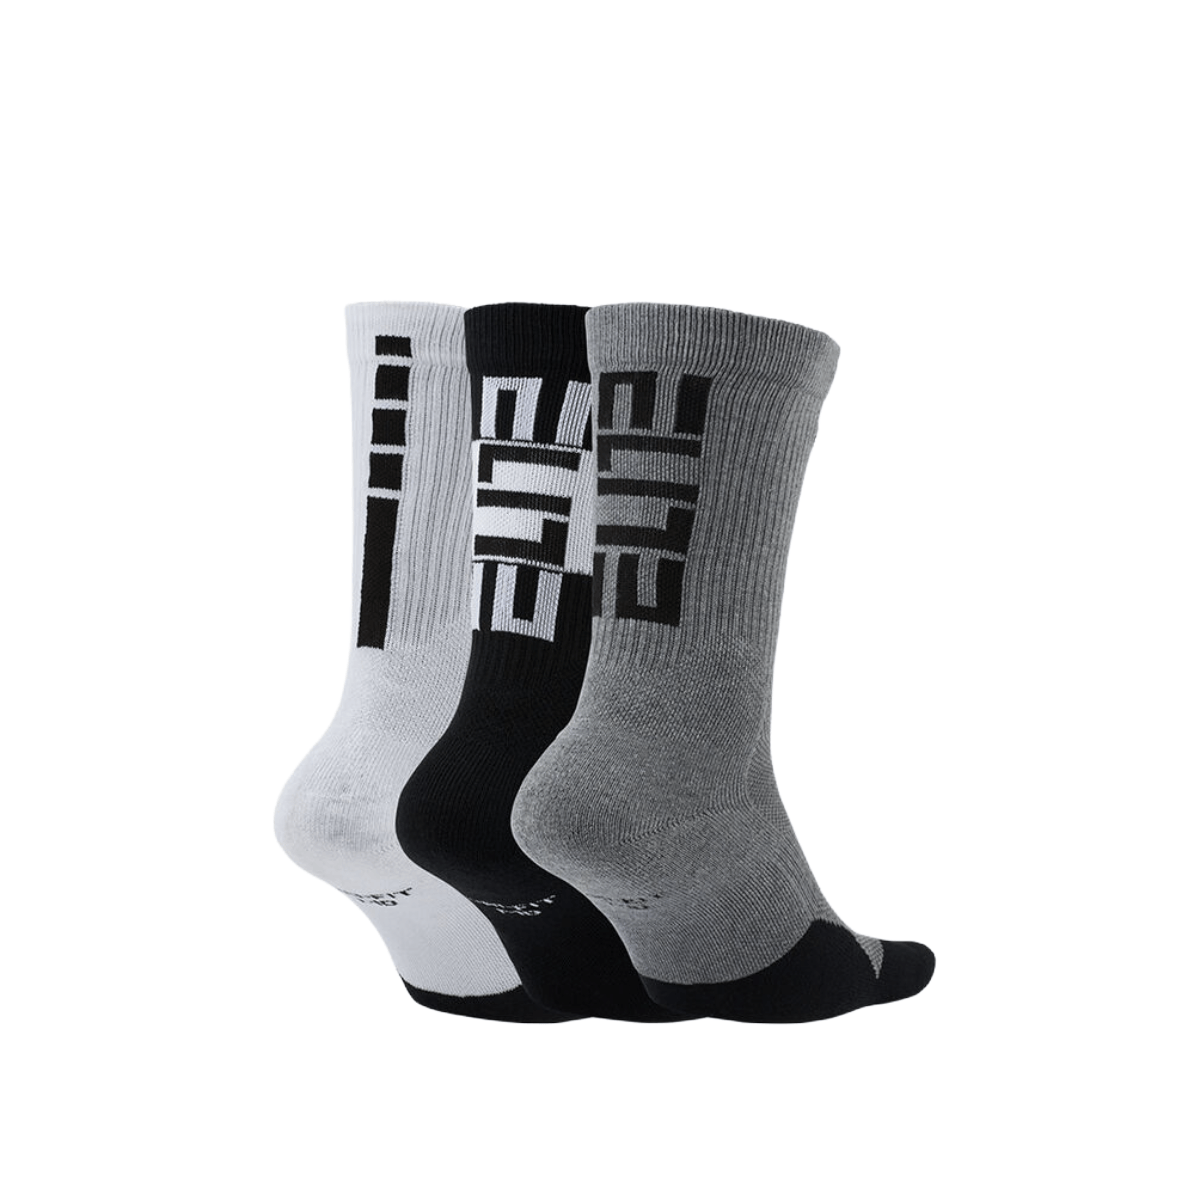 Nike Elite Basketball Crew Sock (3 Pack) - Al's Sporting Goods: Your  One-Stop Shop for Outdoor Sports Gear & Apparel